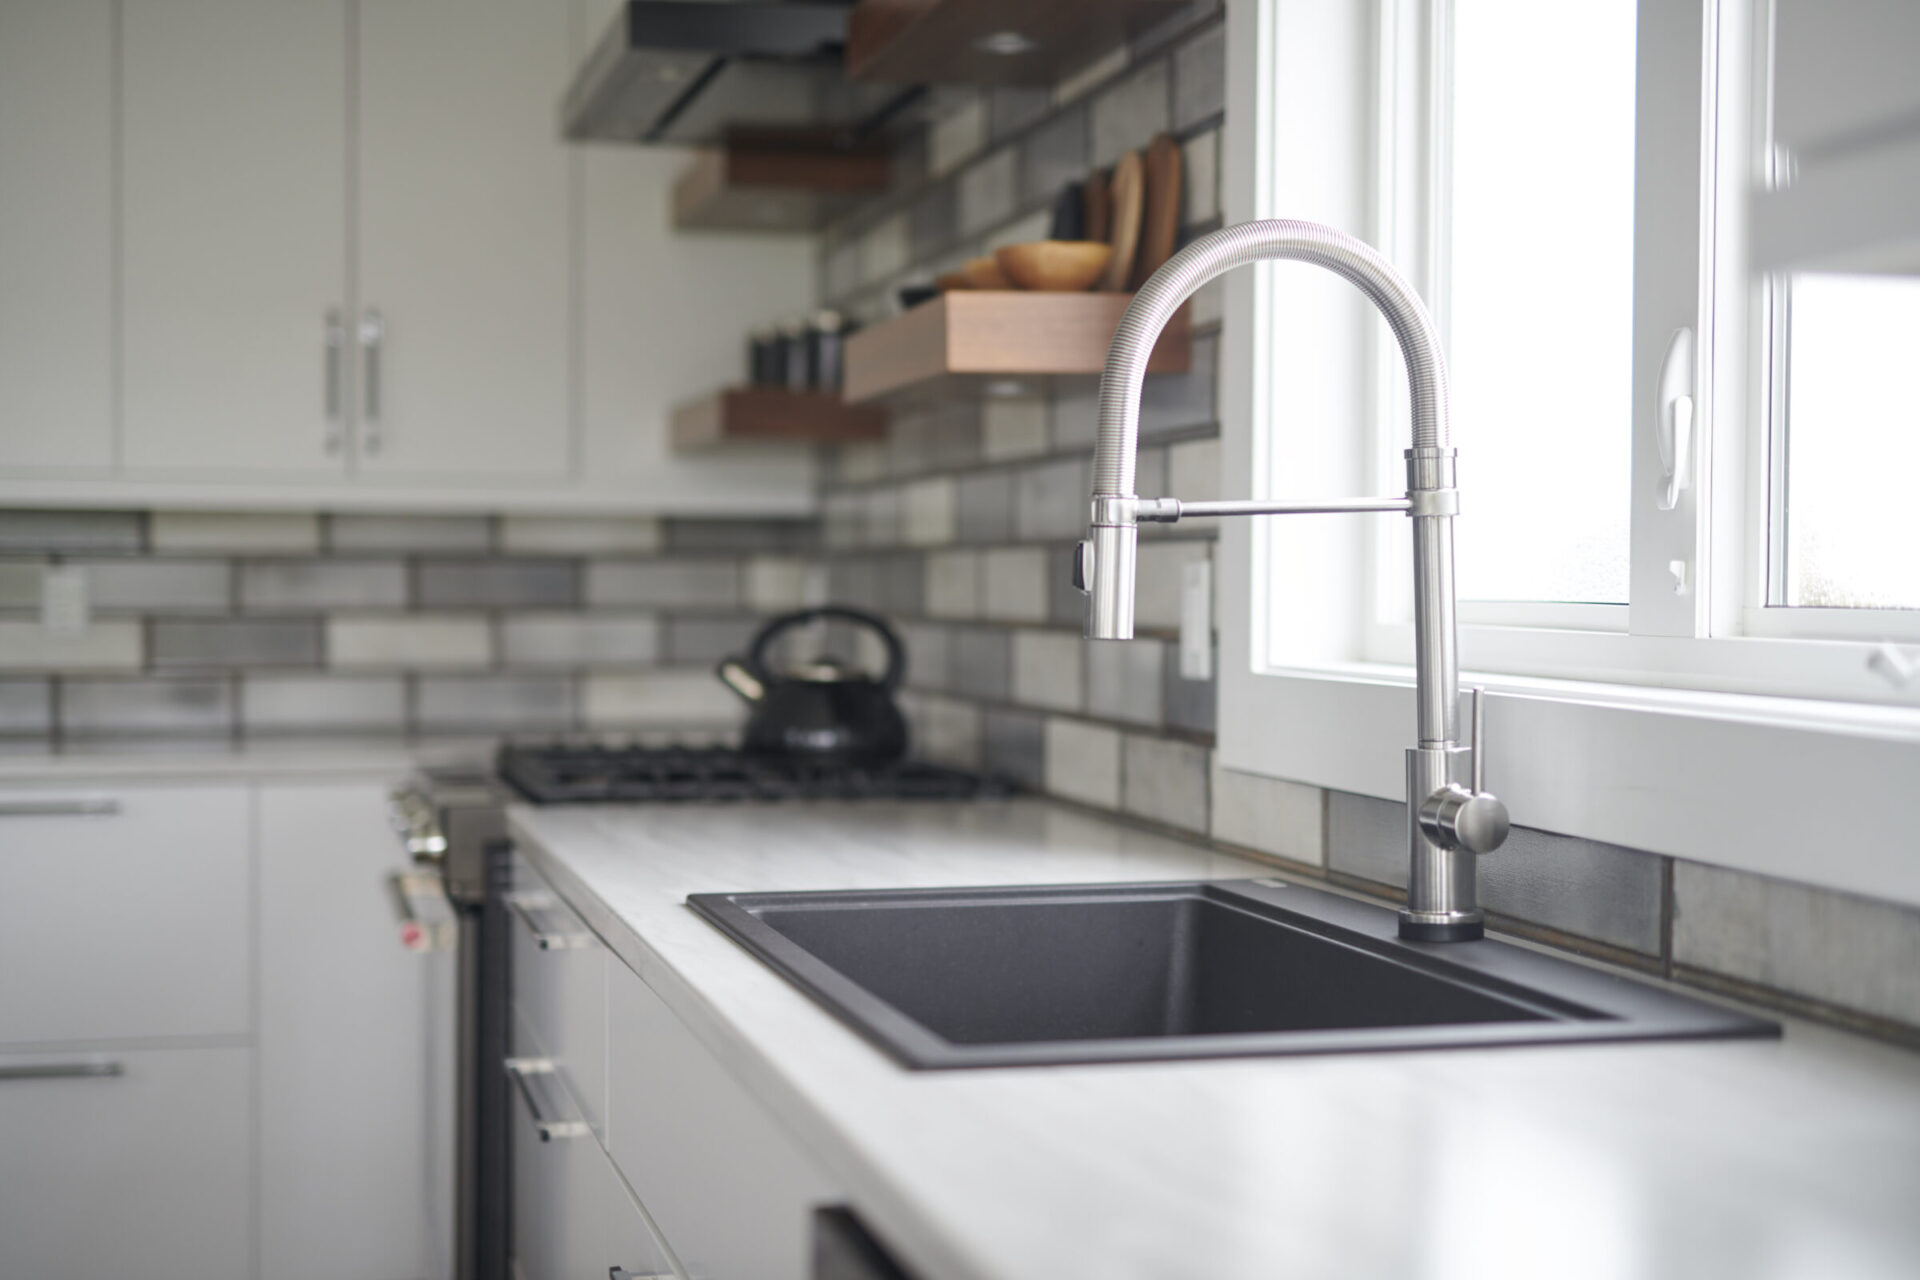 A modern kitchen featuring a stainless steel faucet over a black sink, white cabinets, a tiled backsplash, and a kettle on the stove.